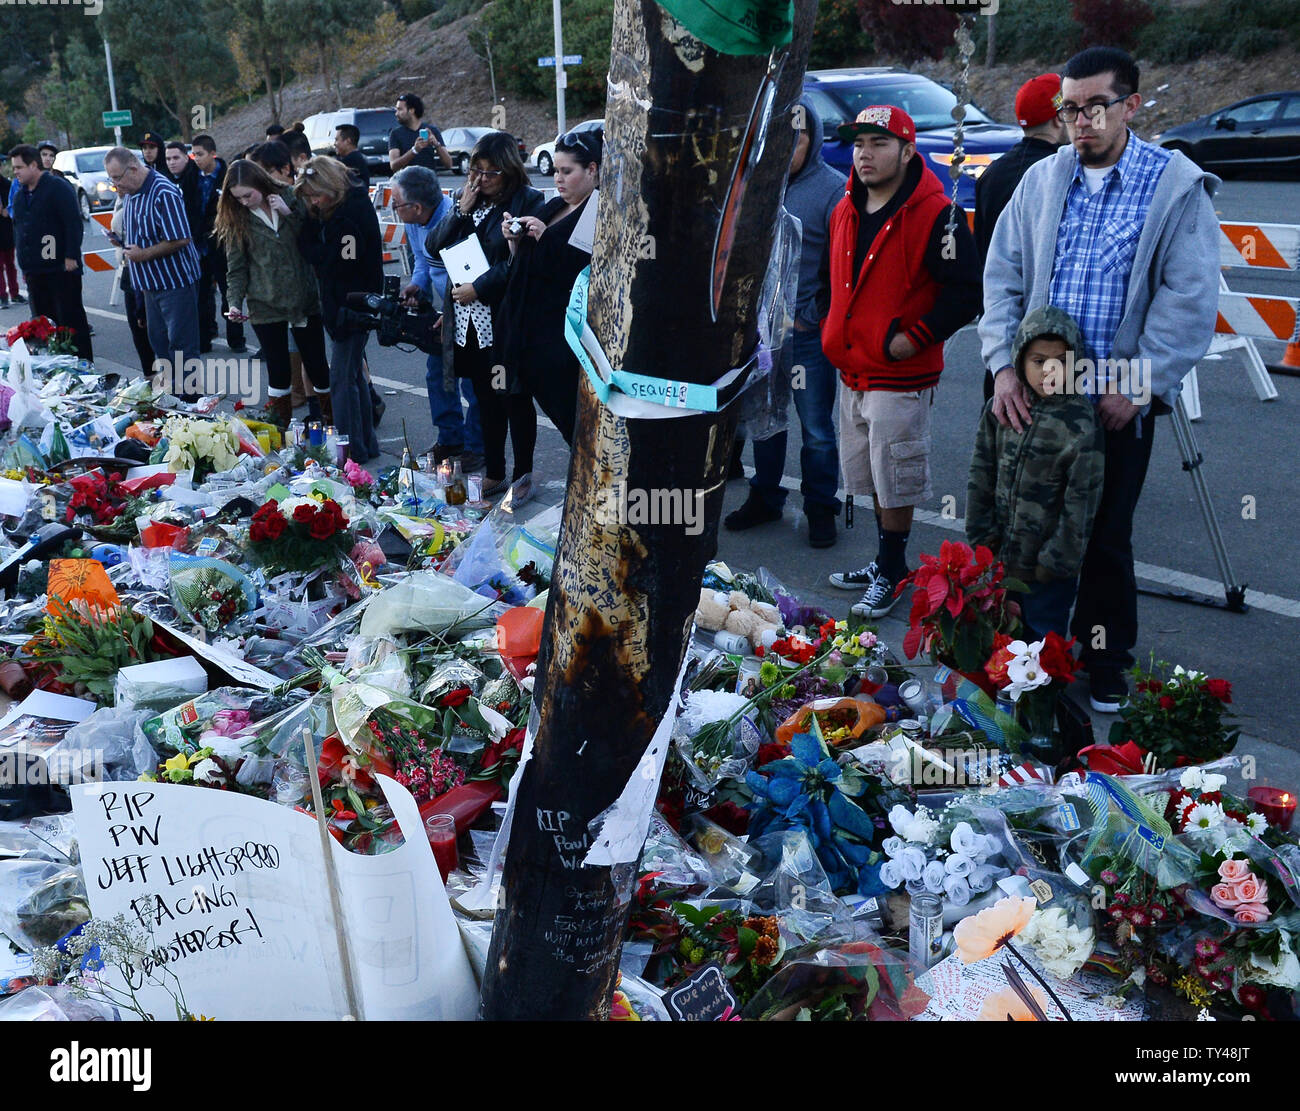 Fans gather at a makeshift memorial to pay respects at the site of the  fiery car accident in which actor Paul Walker was killed in Santa Clarita,  California, on December 4, 2013.